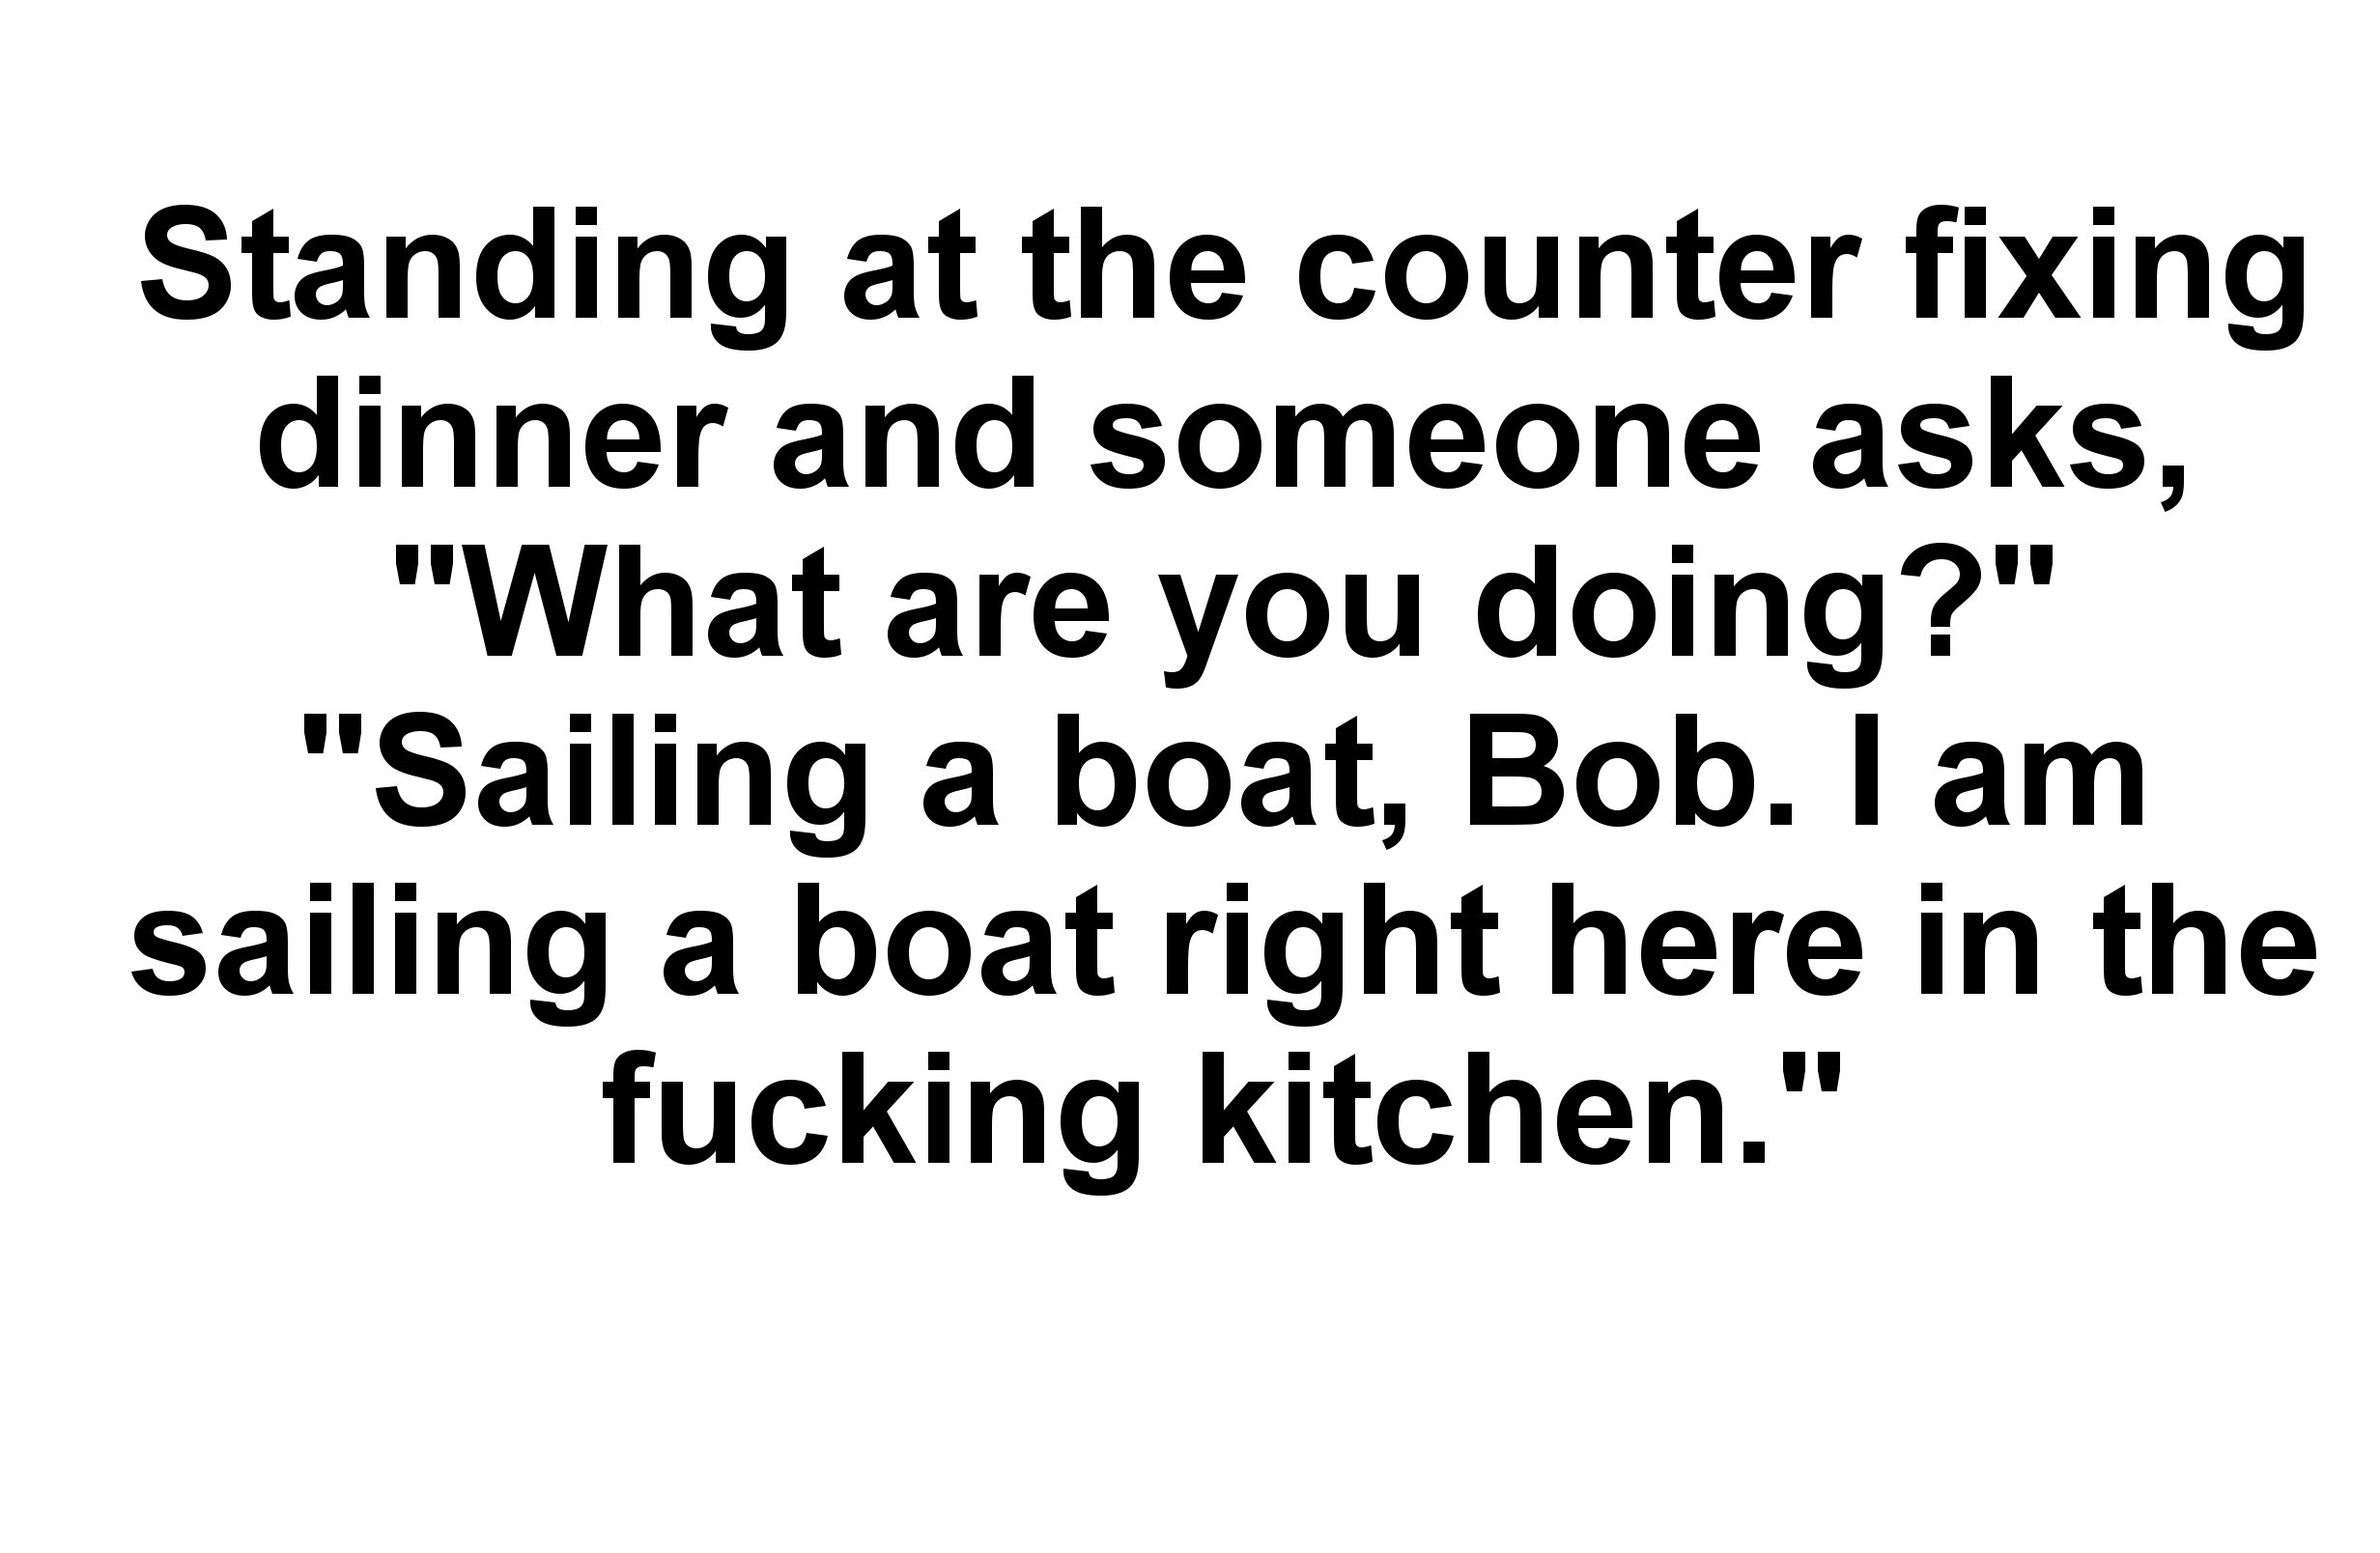 angle - Standing at the counter fixing dinner and someone asks, "What are you doing?" "Sailing a boat, Bob. I am sailing a boat right here in the fucking kitchen."